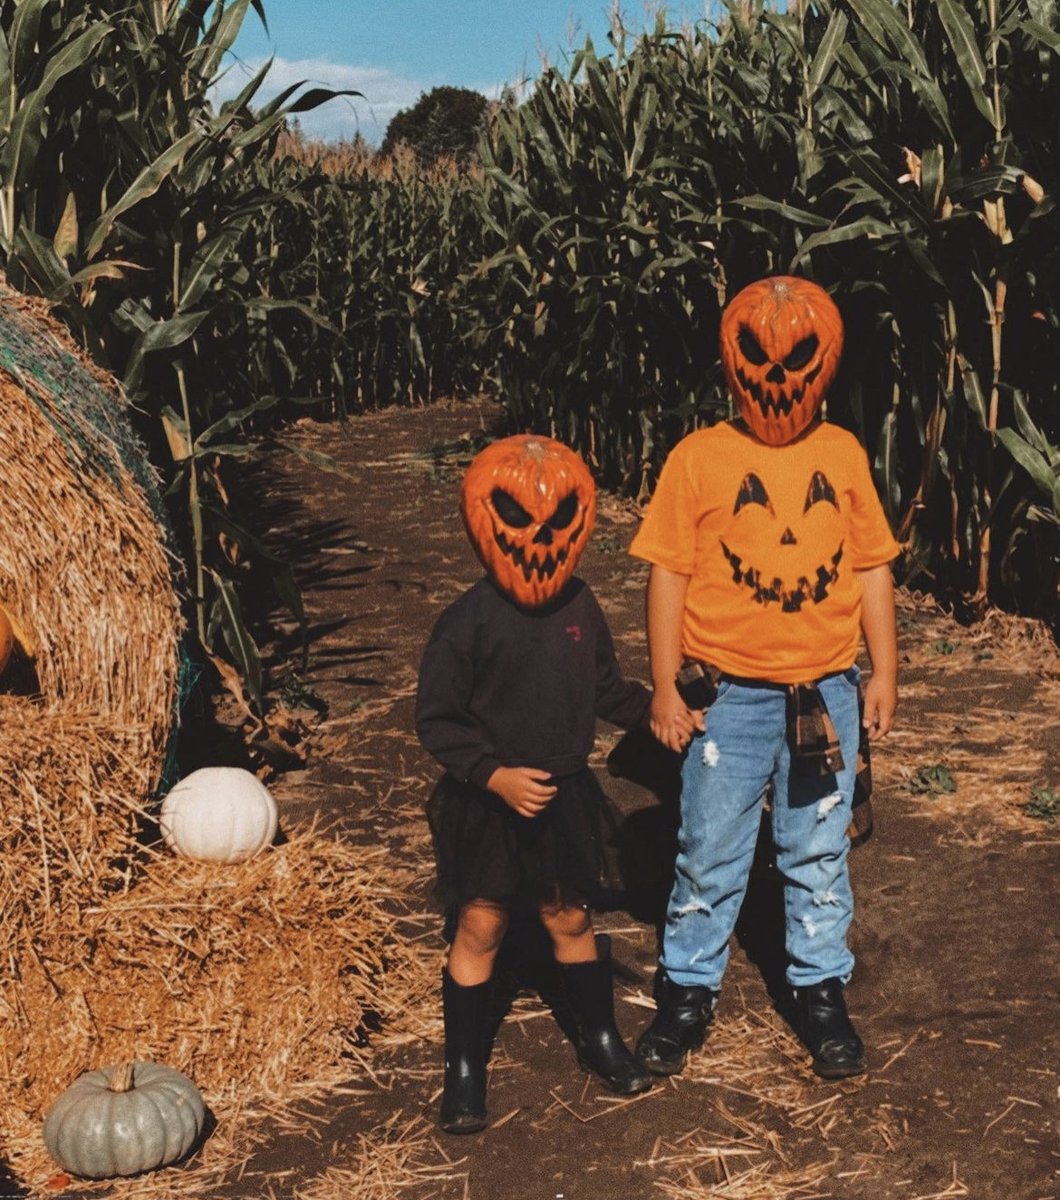 Halloween is almost here 🎃🌙🧟 Get in the spooky spirit this weekend with a visit to Robintide Farms Pumpkin Patch and Corn Maze followed by pumpkin carving. Don’t miss out this is our final weekend of the season! #RobintideFarms 📸 by @_rachelcolleen